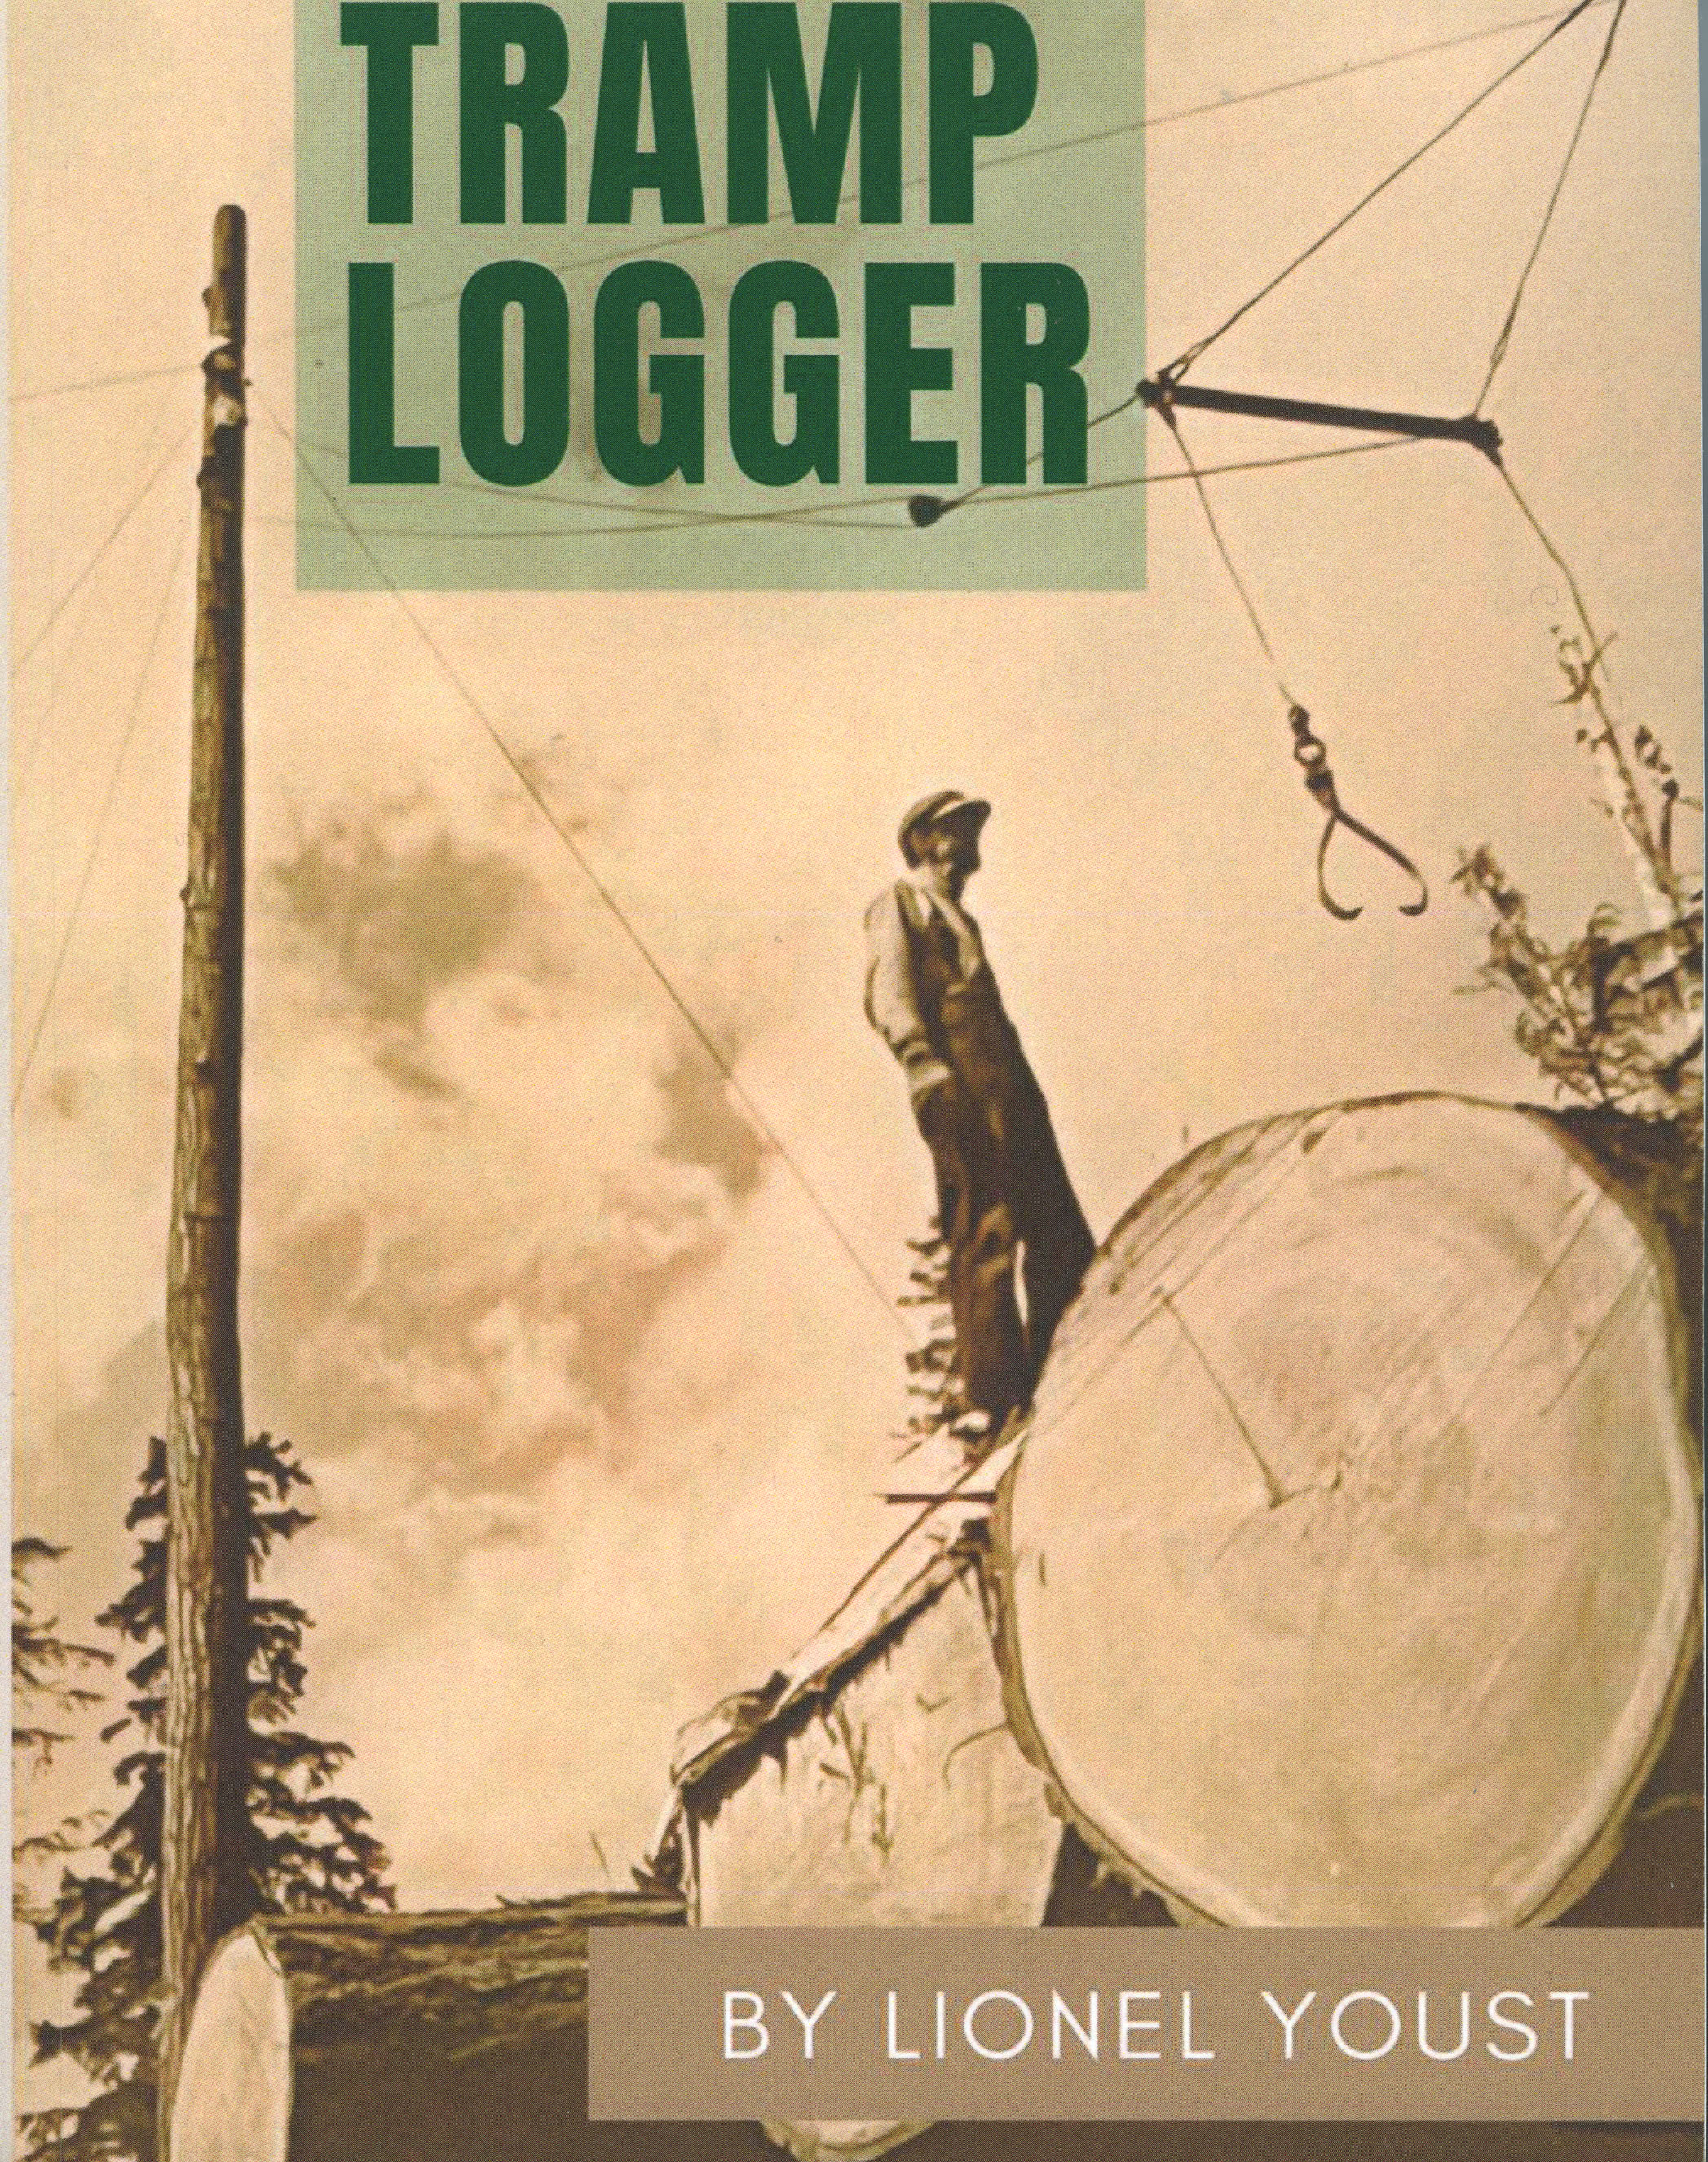 book cover that shows a man standing by two large logs Book title is Tramp Logger